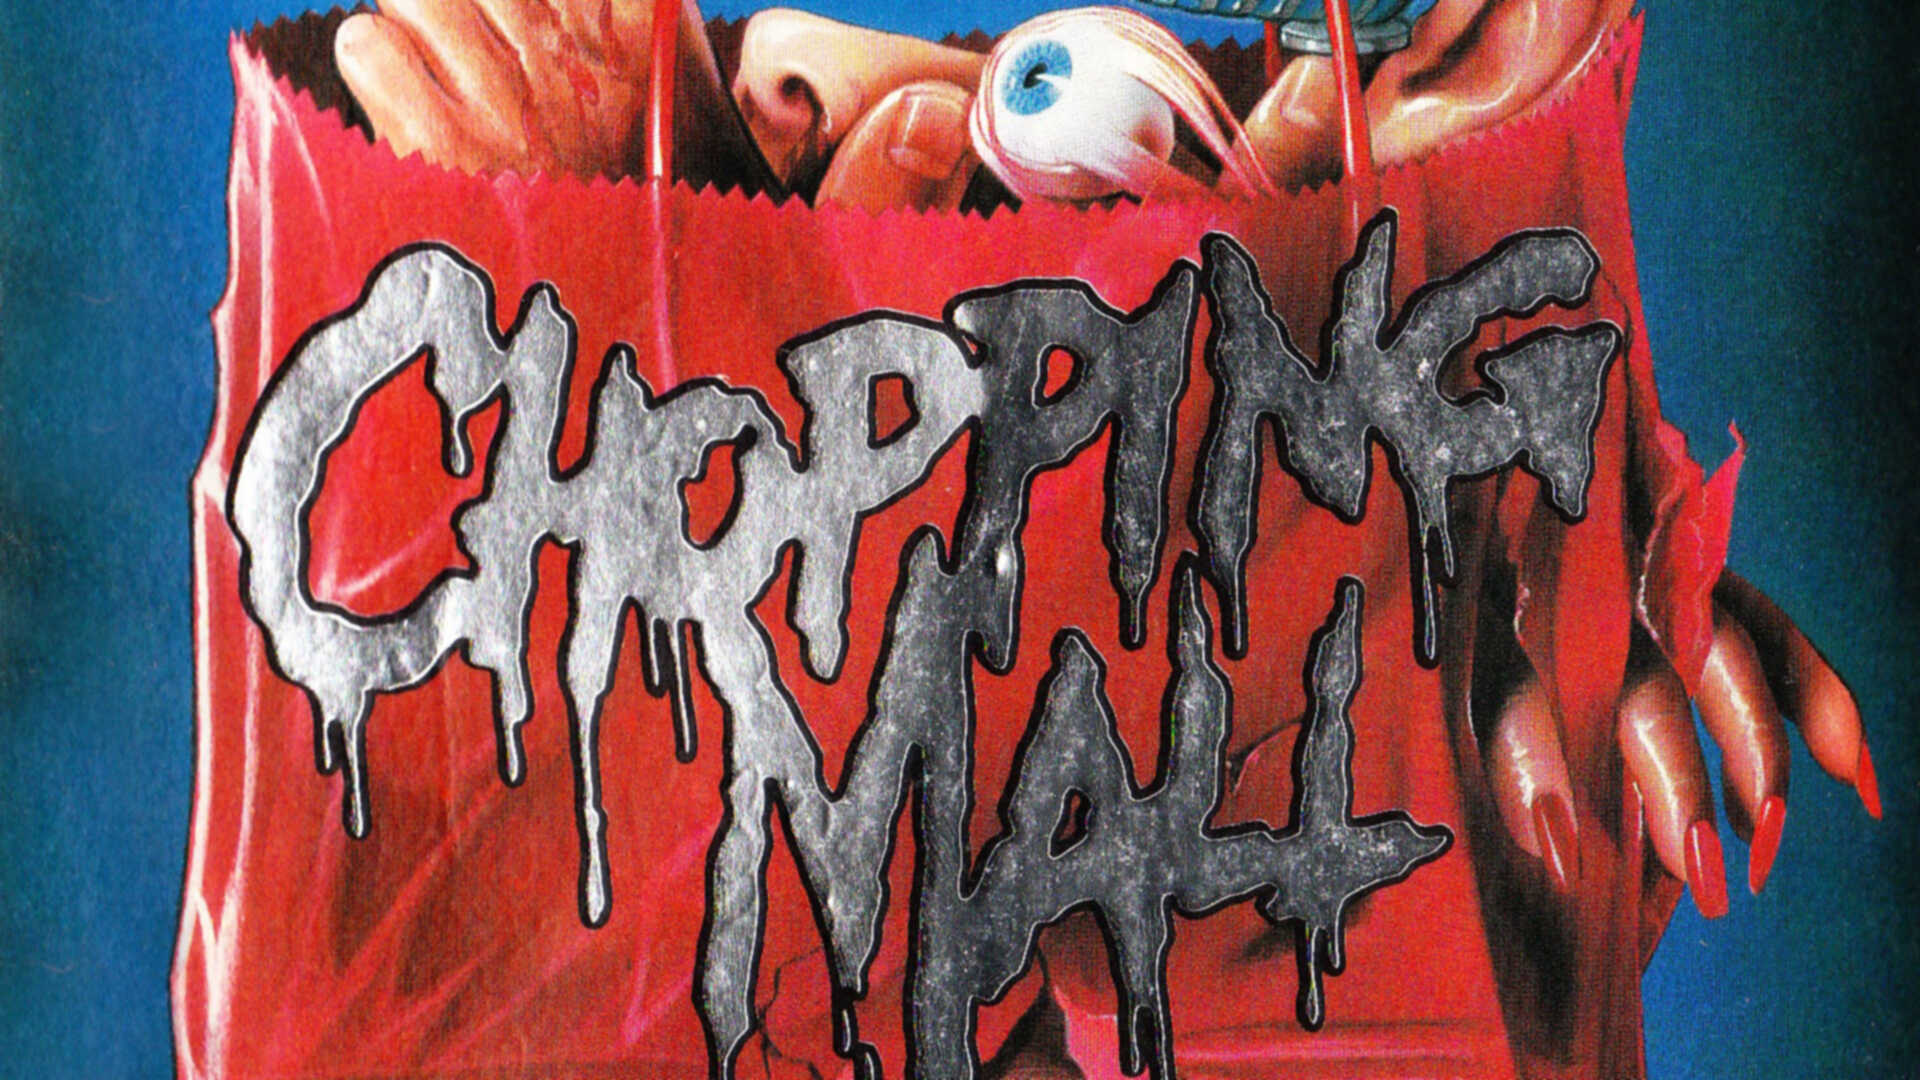 33-facts-about-the-movie-chopping-mall